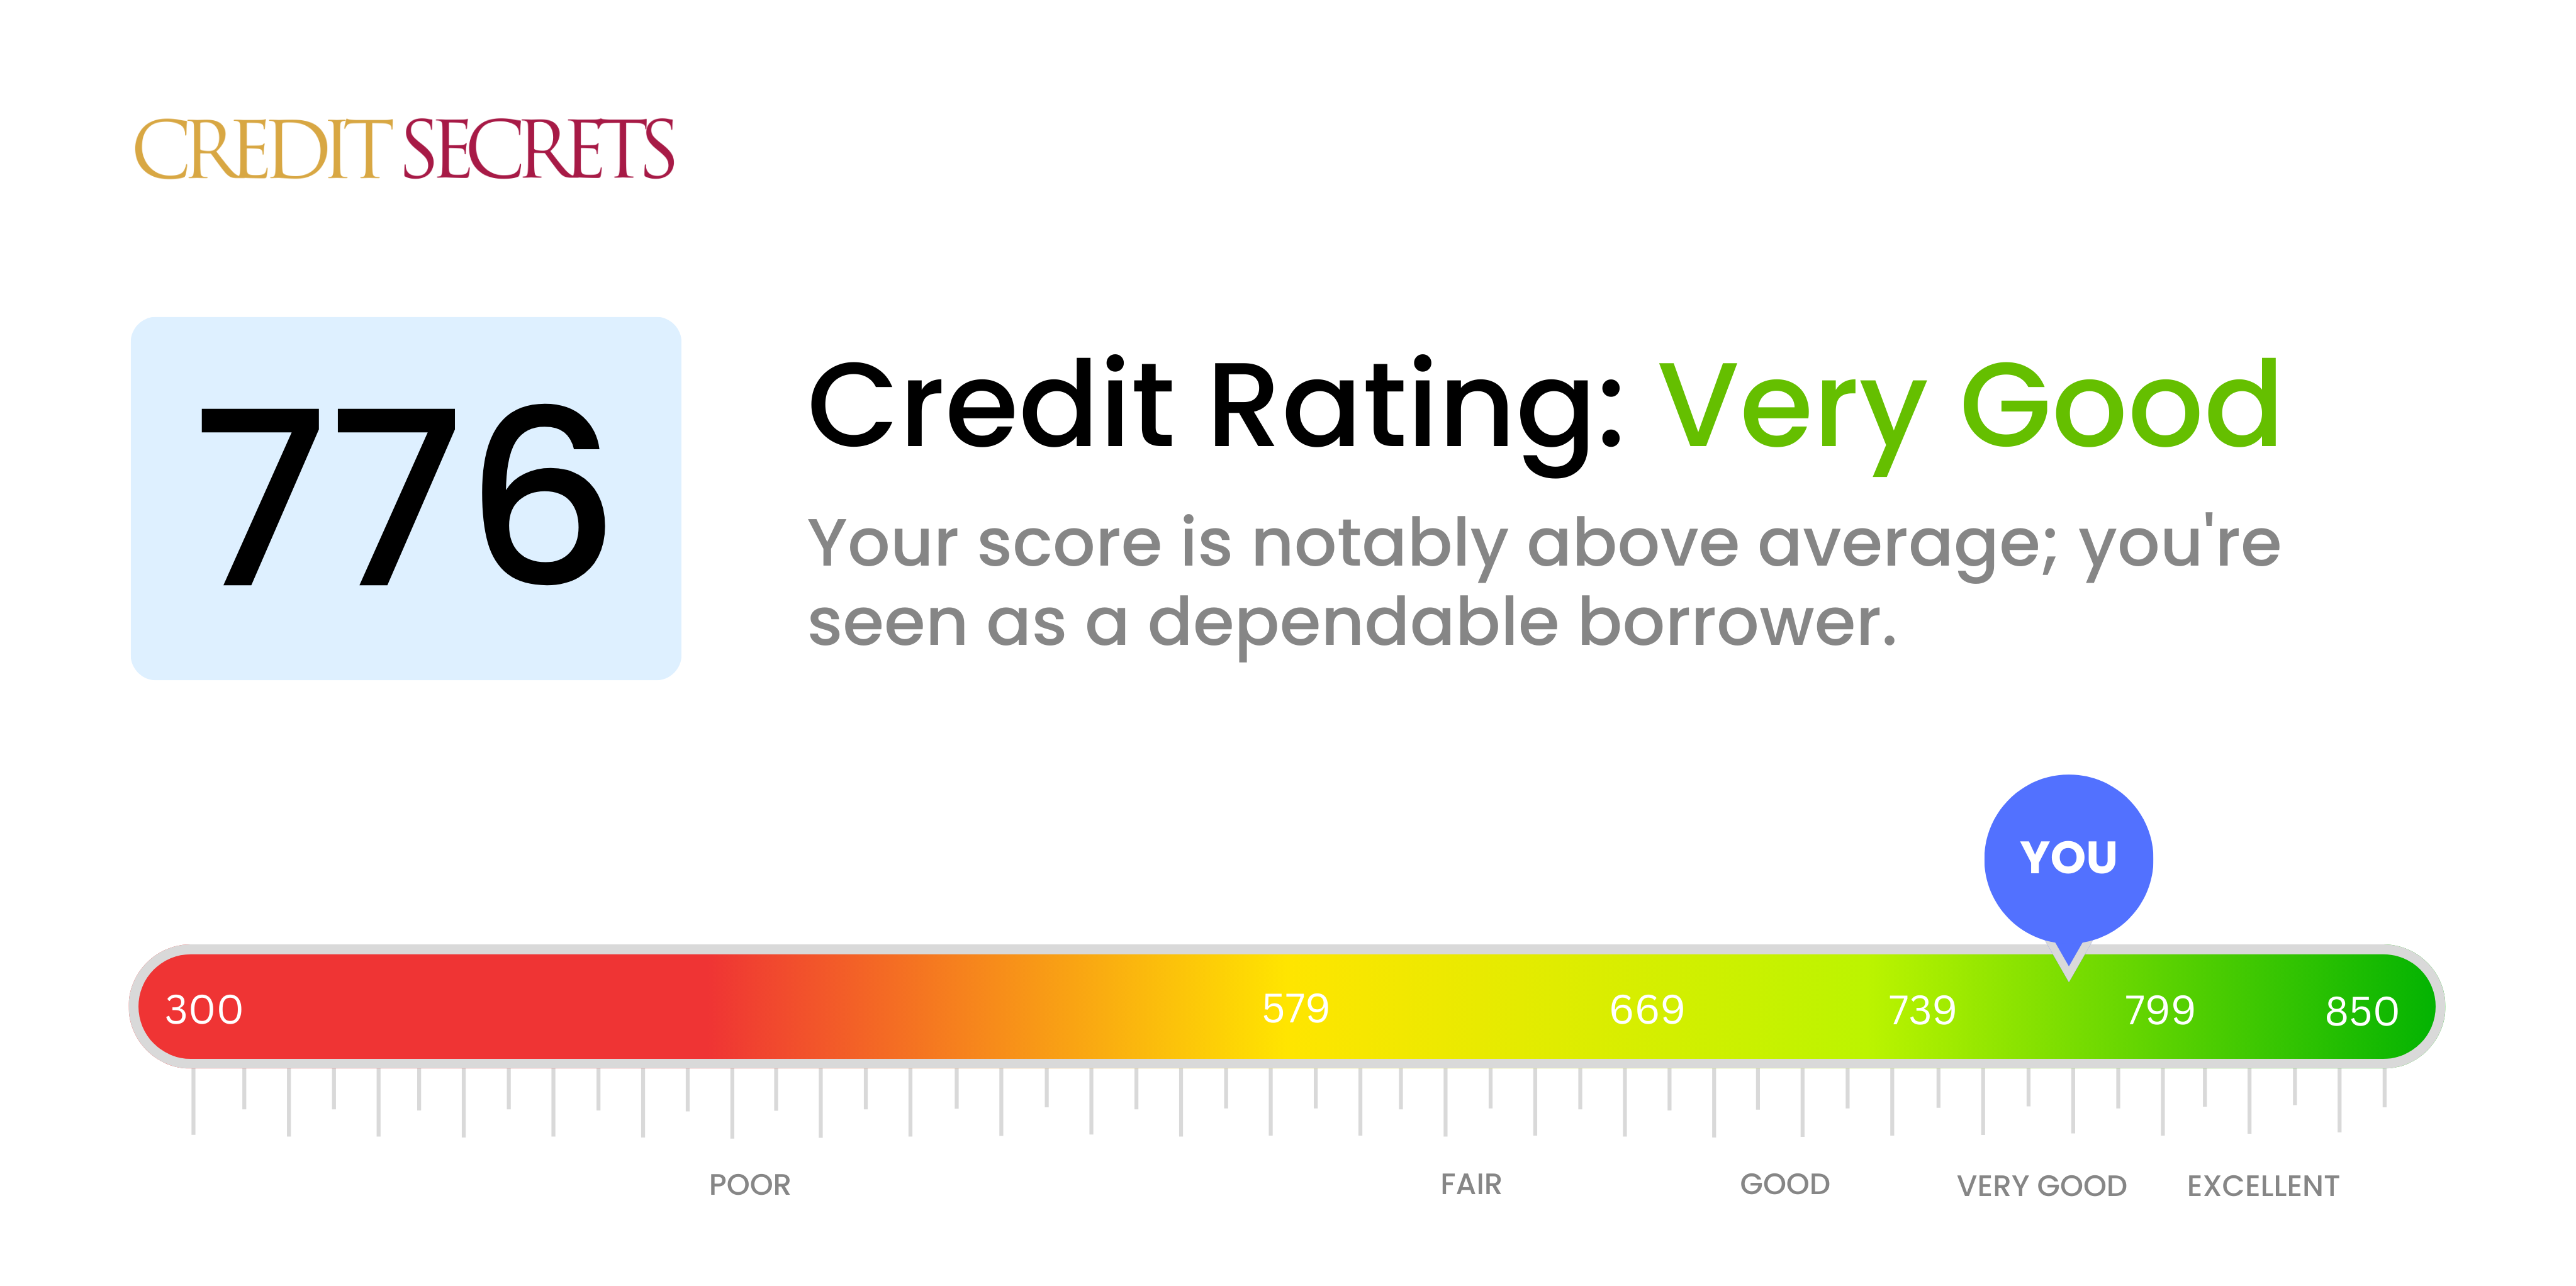 Is 776 a good credit score?